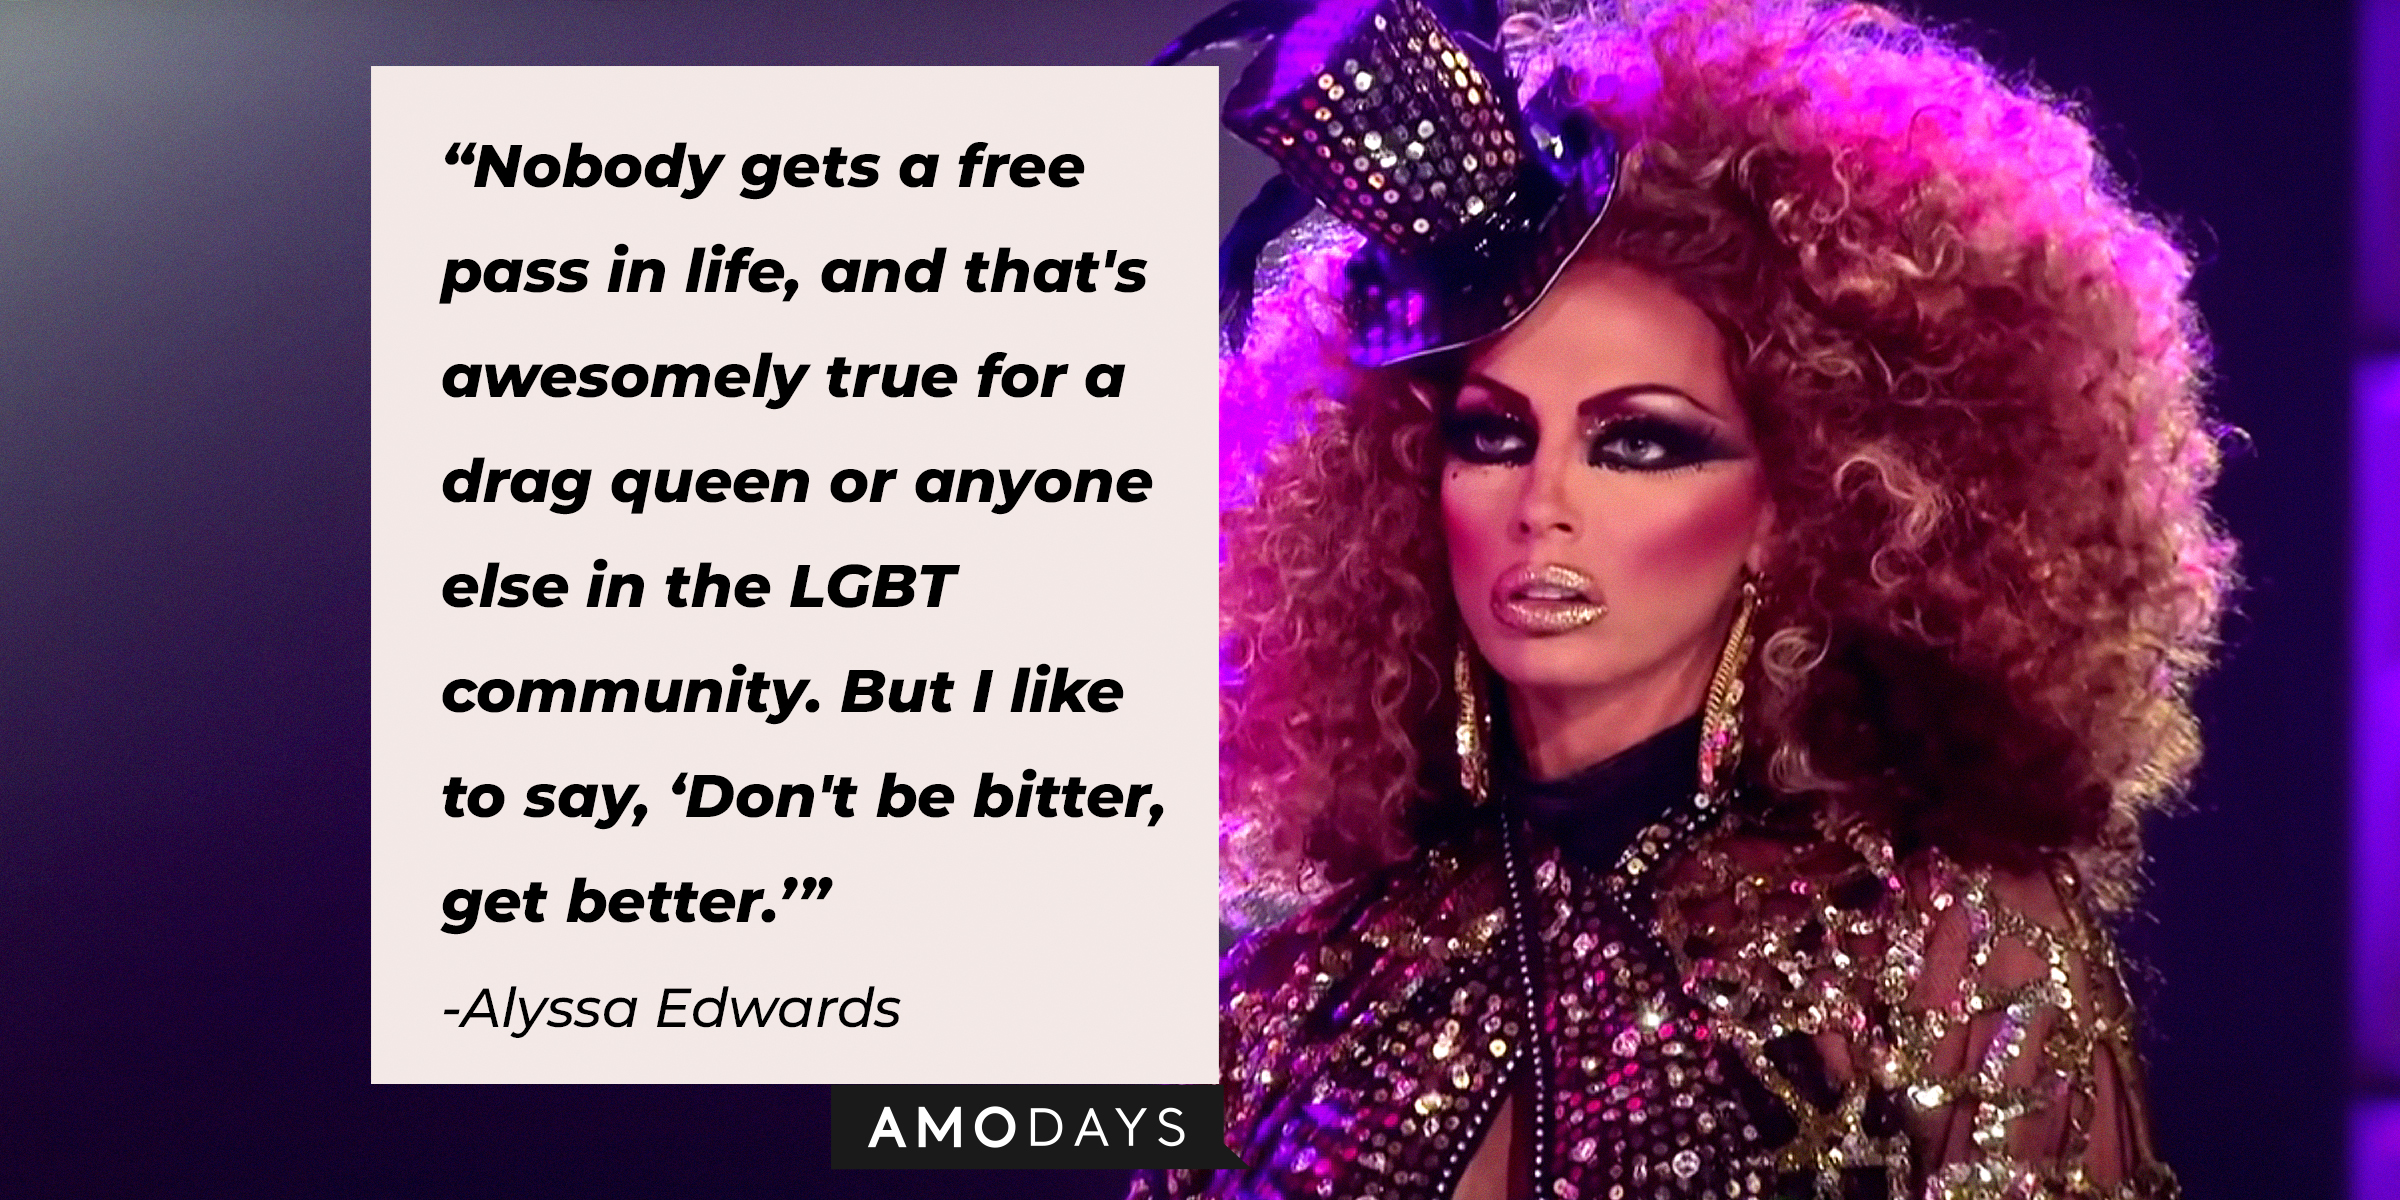 A photo of Alyssa Edwards with Alyssa Edwards's quote: “Nobody gets a free pass in life, and that's awesomely true for a drag queen or anyone else in the LGBT community. But I like to say, 'Don't be bitter, get better.'” | Source: youtube.com/rupaulsdragr